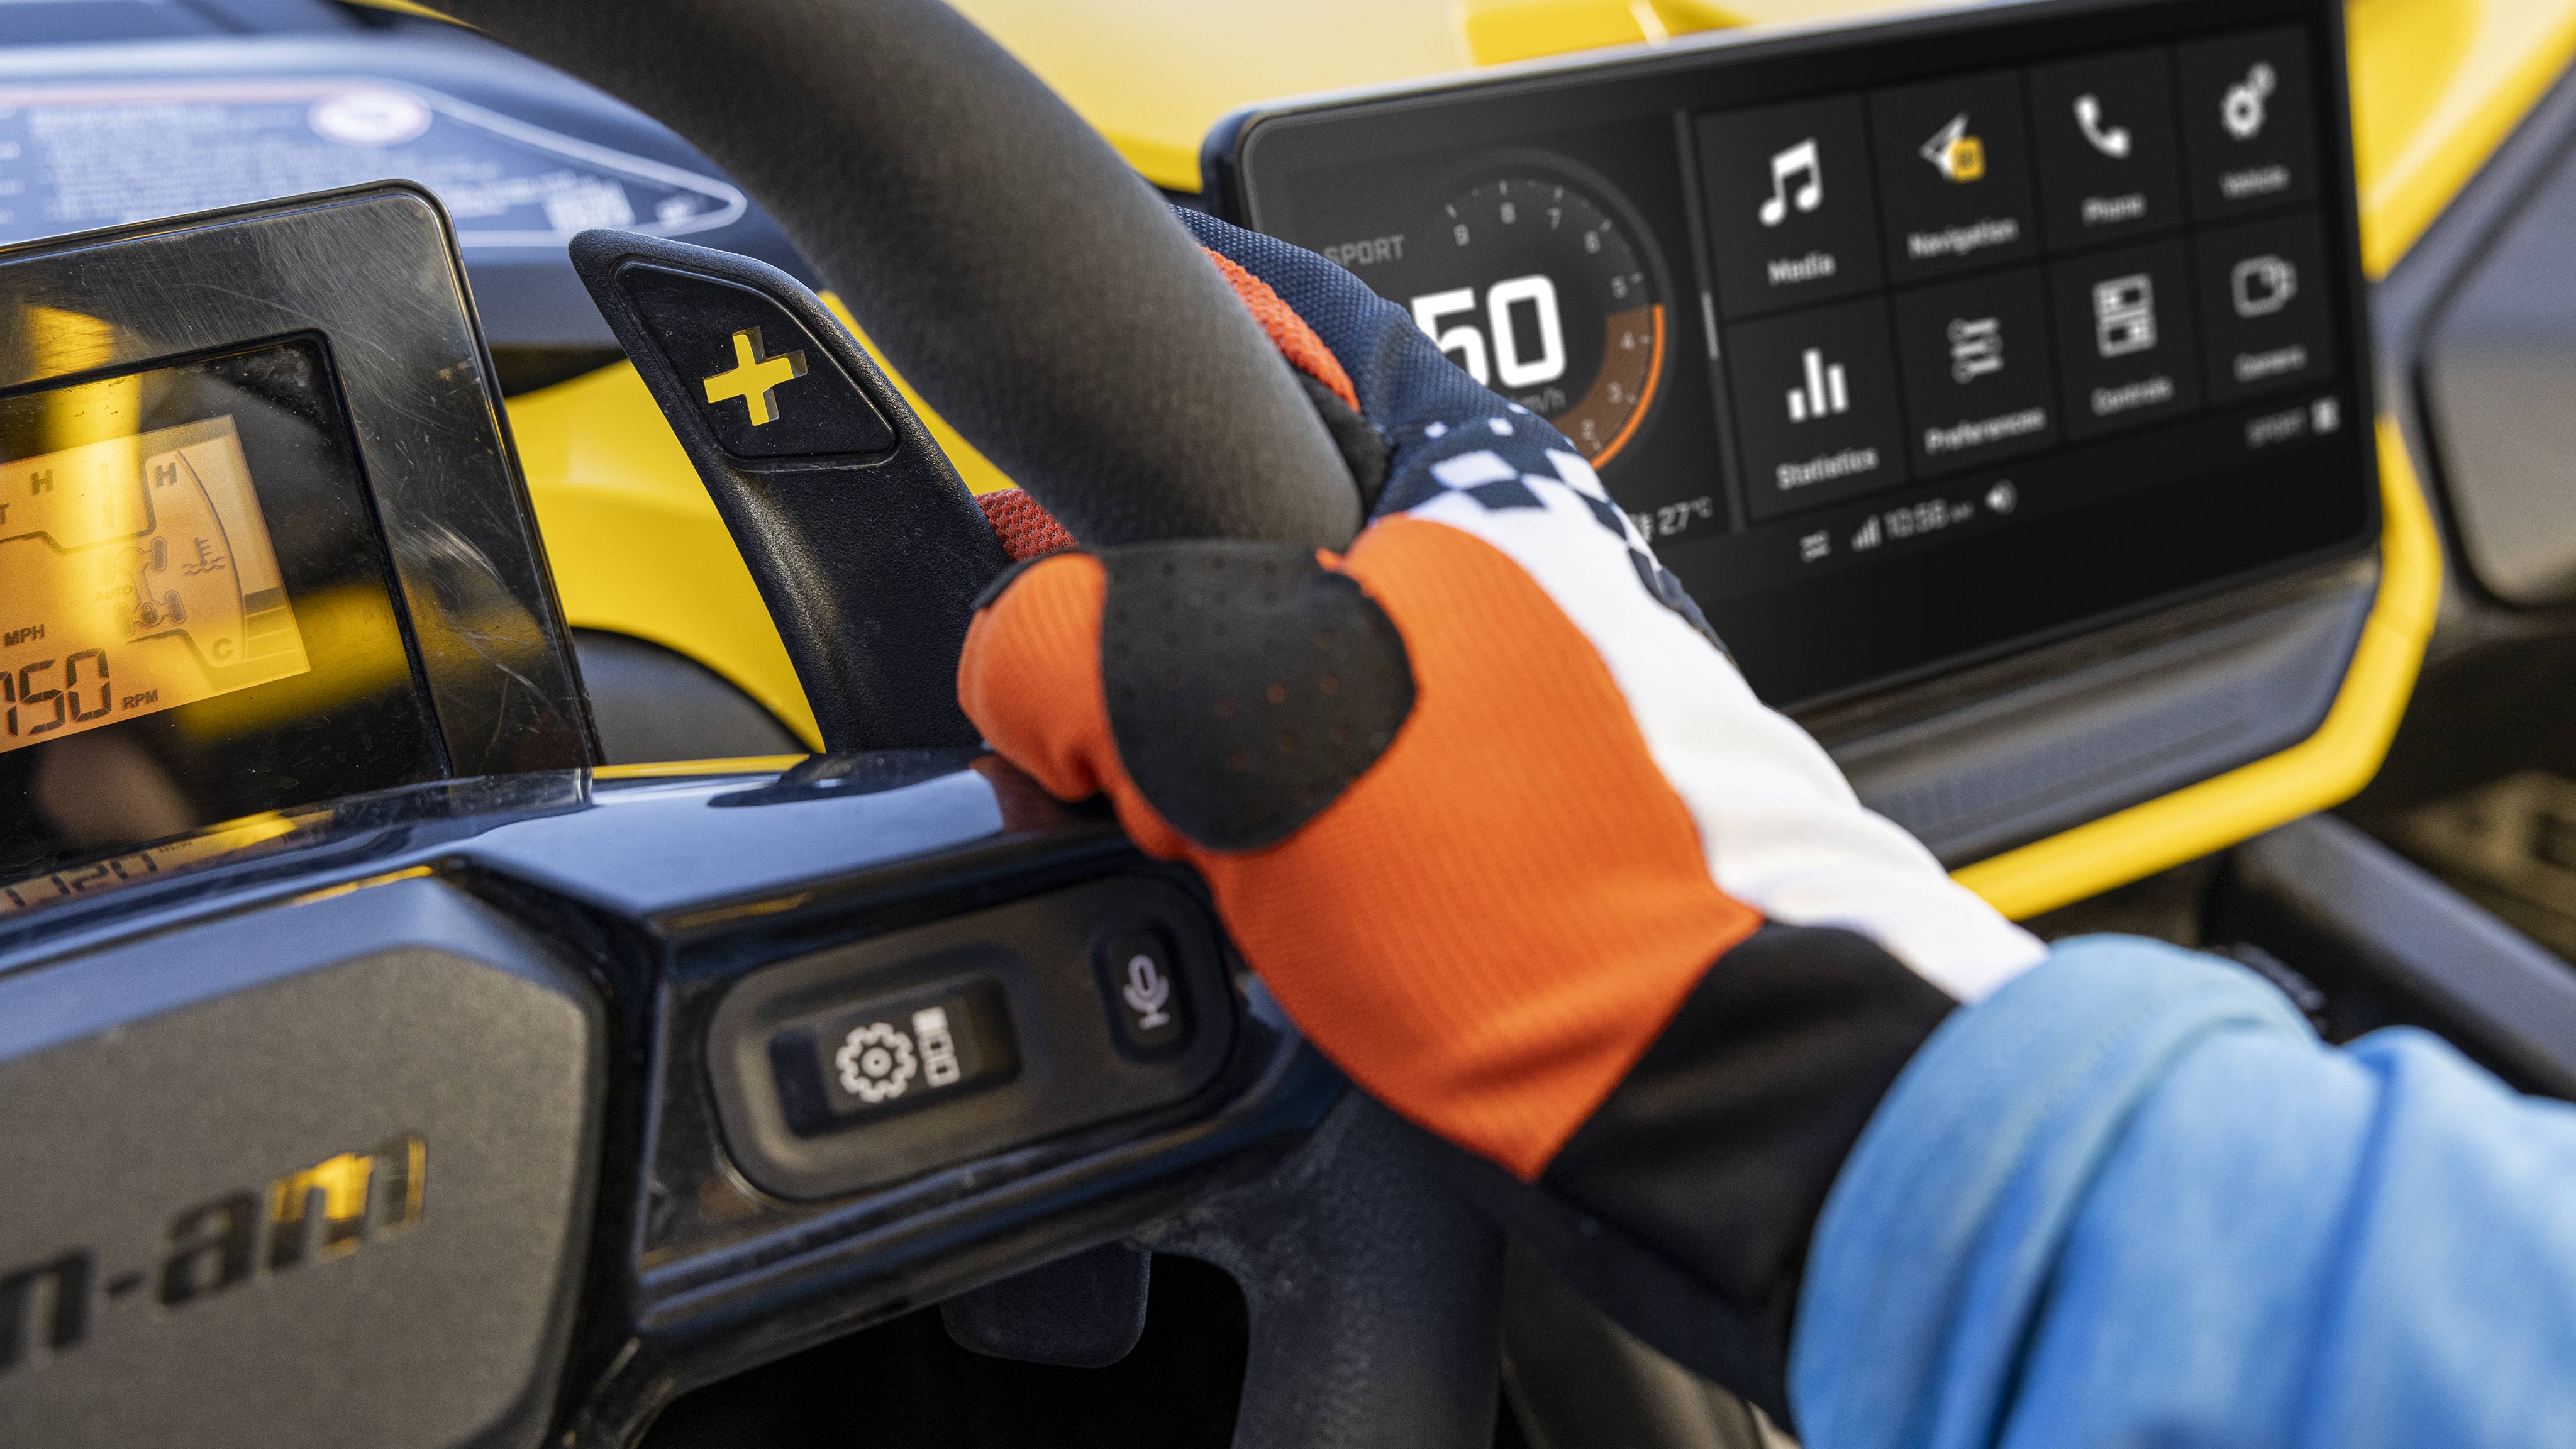 Intuitive interface of the Can-Am 10.25" touchscreen